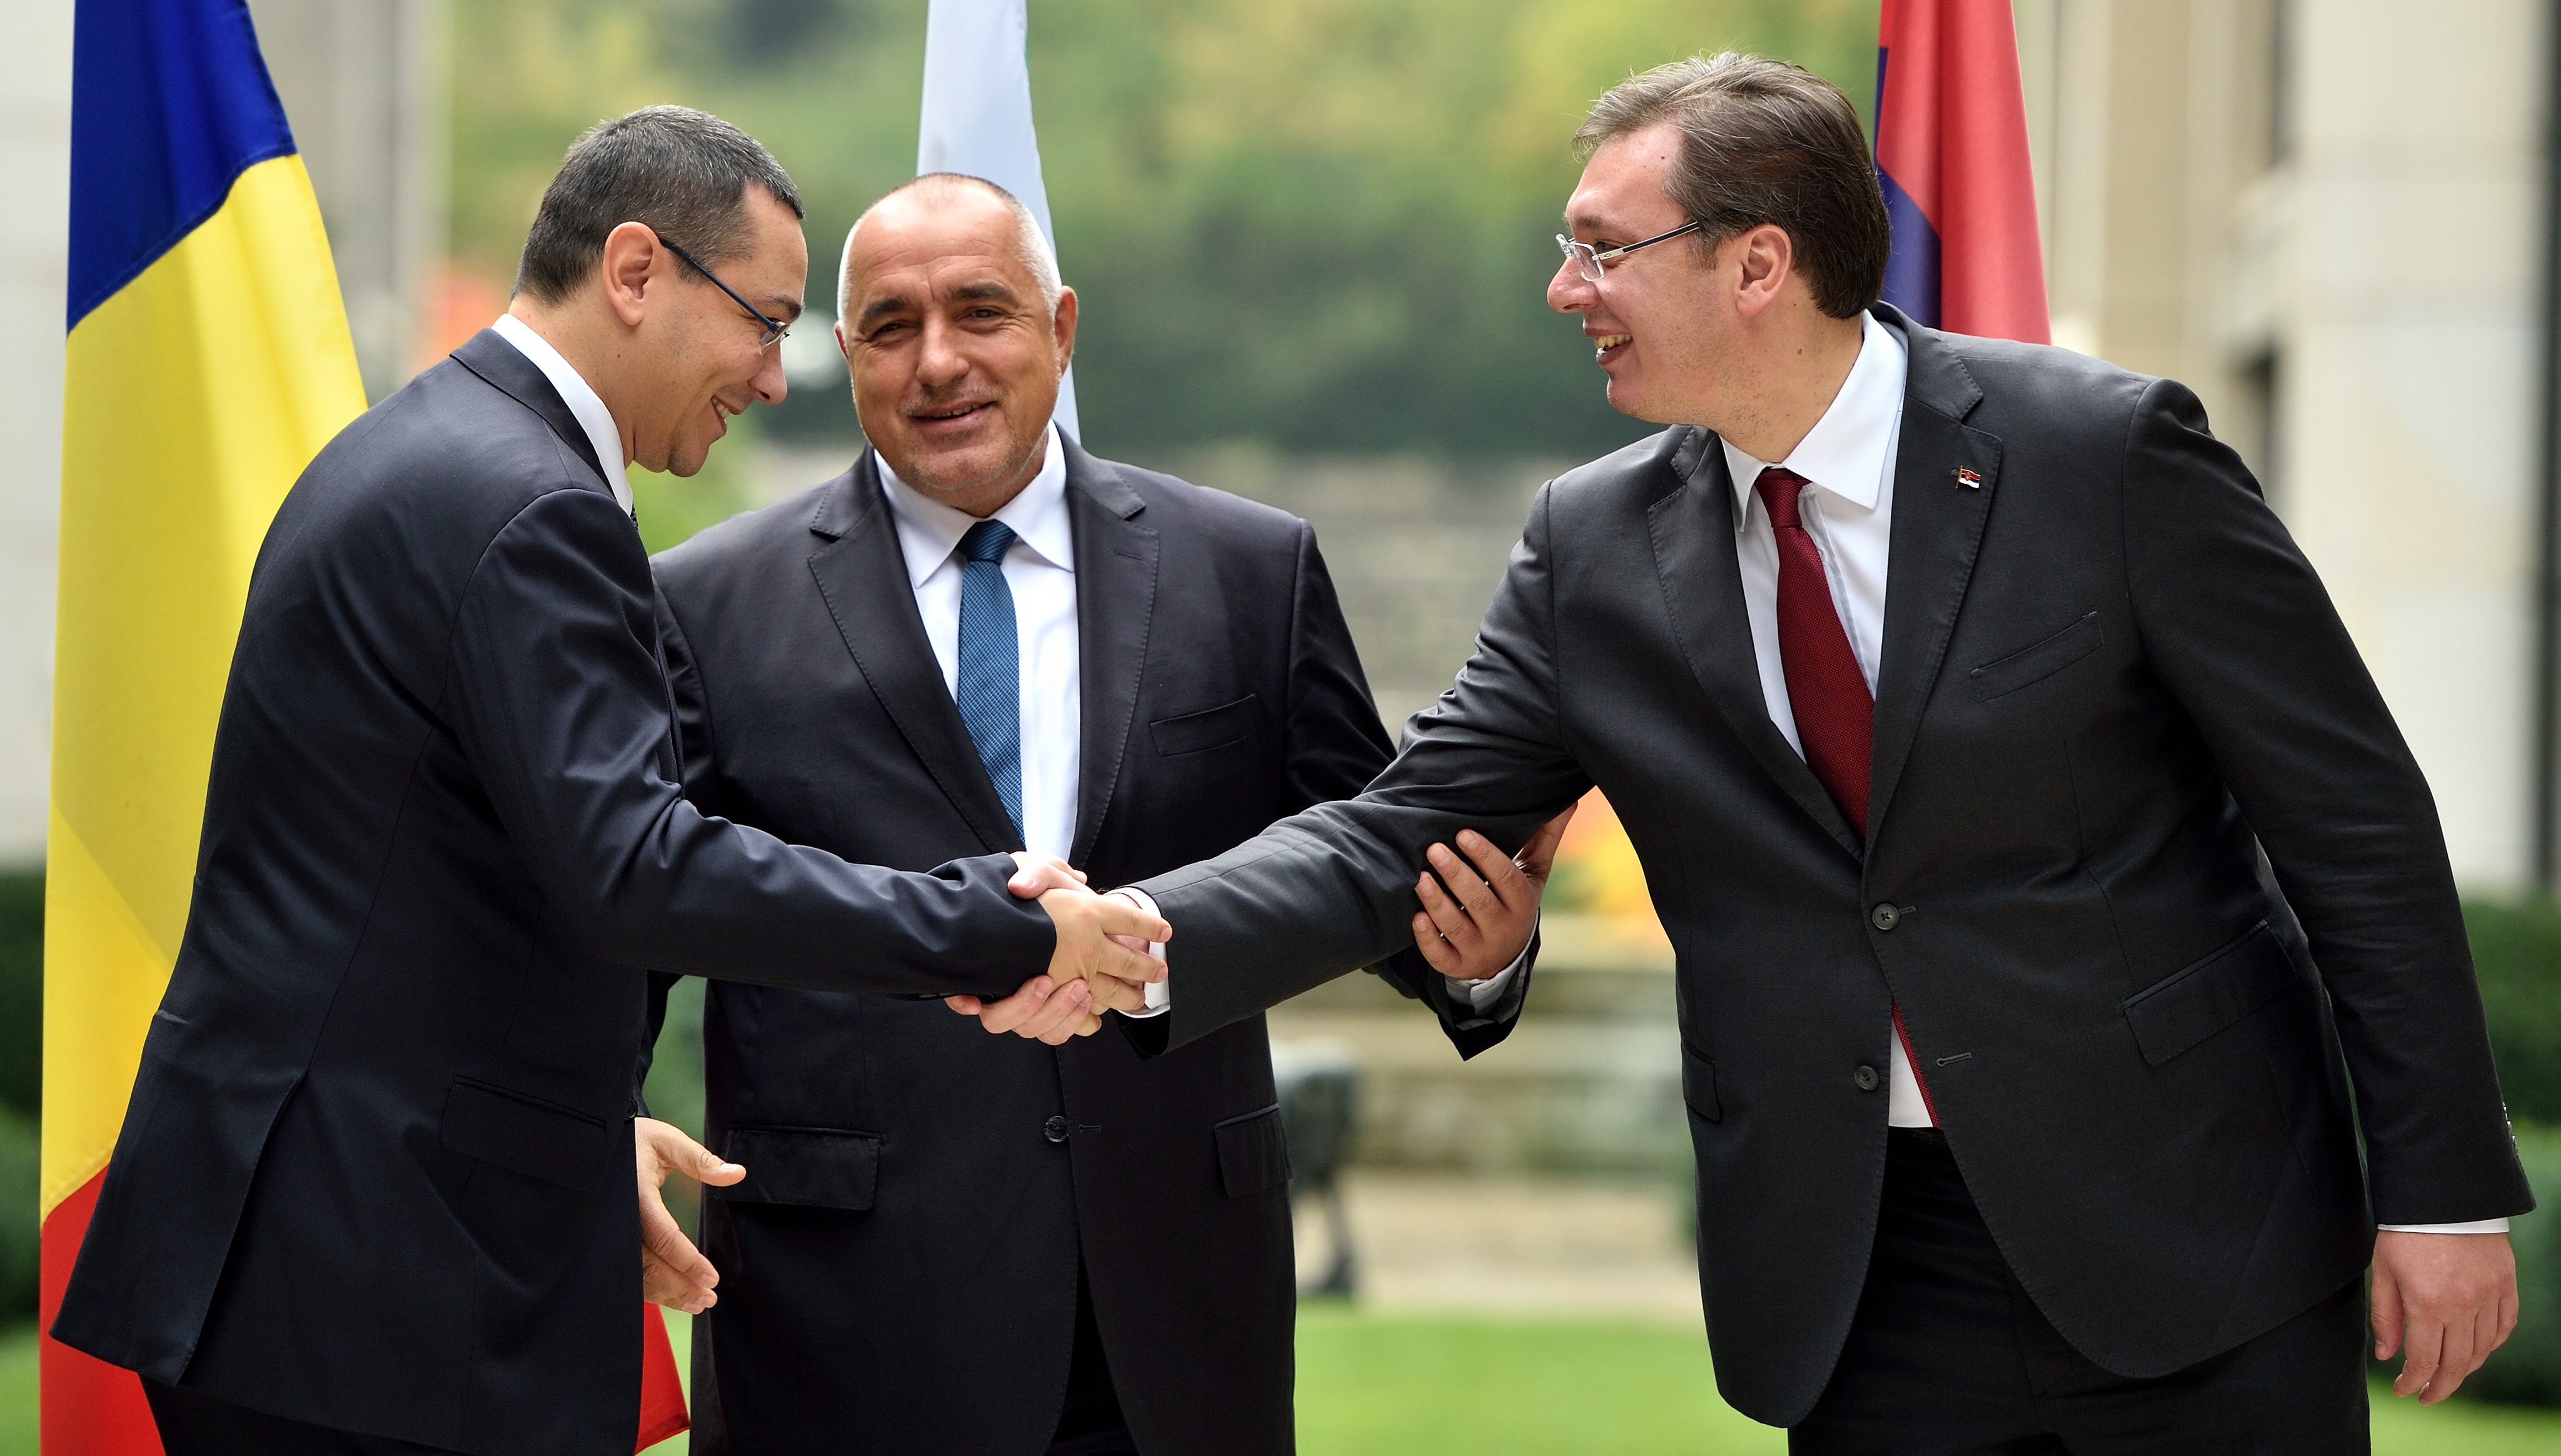 epa04992541 Bulgarian Prime Minister Boyko Borisov (C) welcomes Romanian Prime Minister Victor Ponta (L) and Serbian Prime Minister Aleksandar Vucic (R), during their official meeting in Sofia, Bulgaria, 24 October 2015. The three Prime Ministers will be discussing the migration crisis in Europe and its impact in the countries of the Balkans and the development of cooperation in the field of infrastructure and energy. EPA/VASSIL DONEV